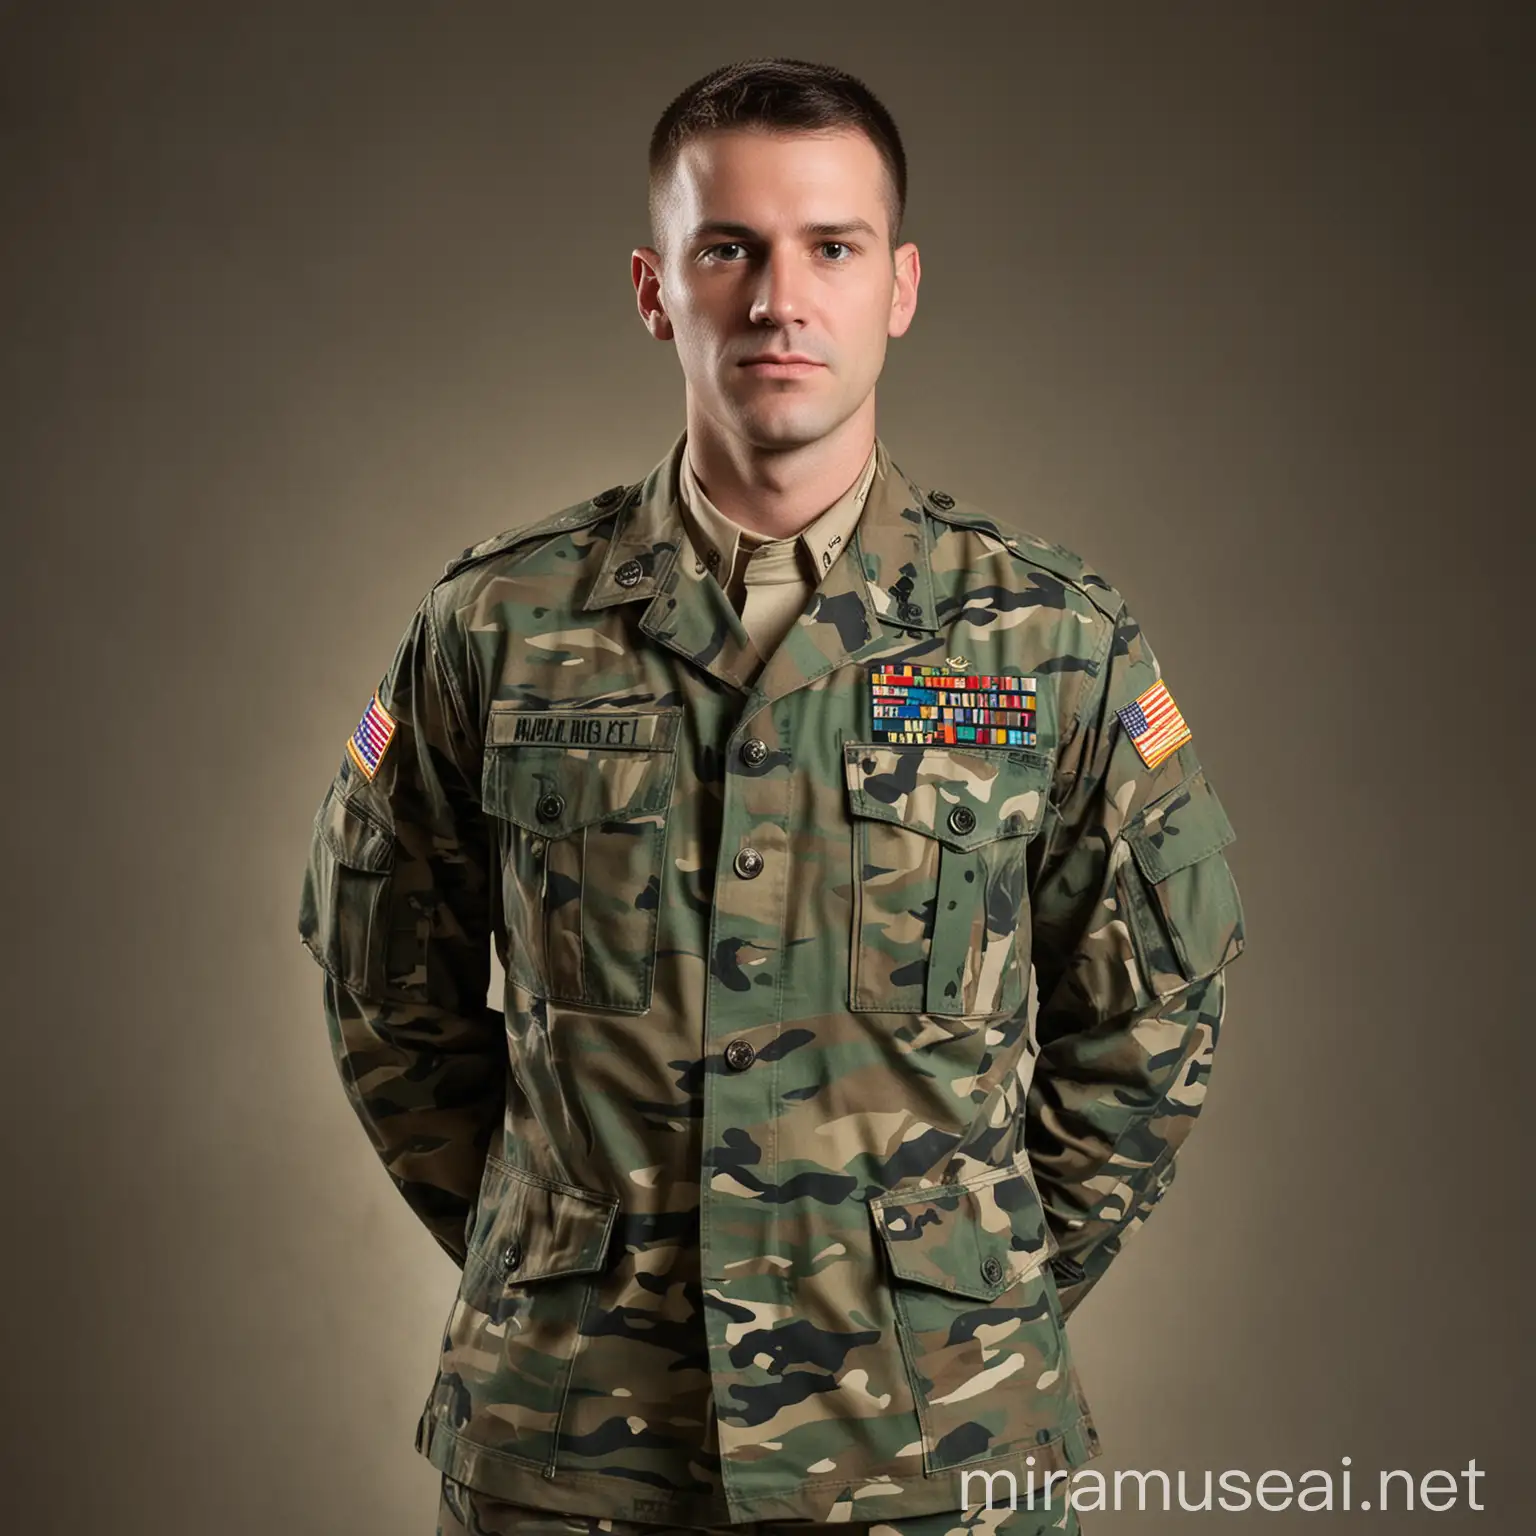 Army Lieutenant Man in Camouflage Uniform Standing Proudly